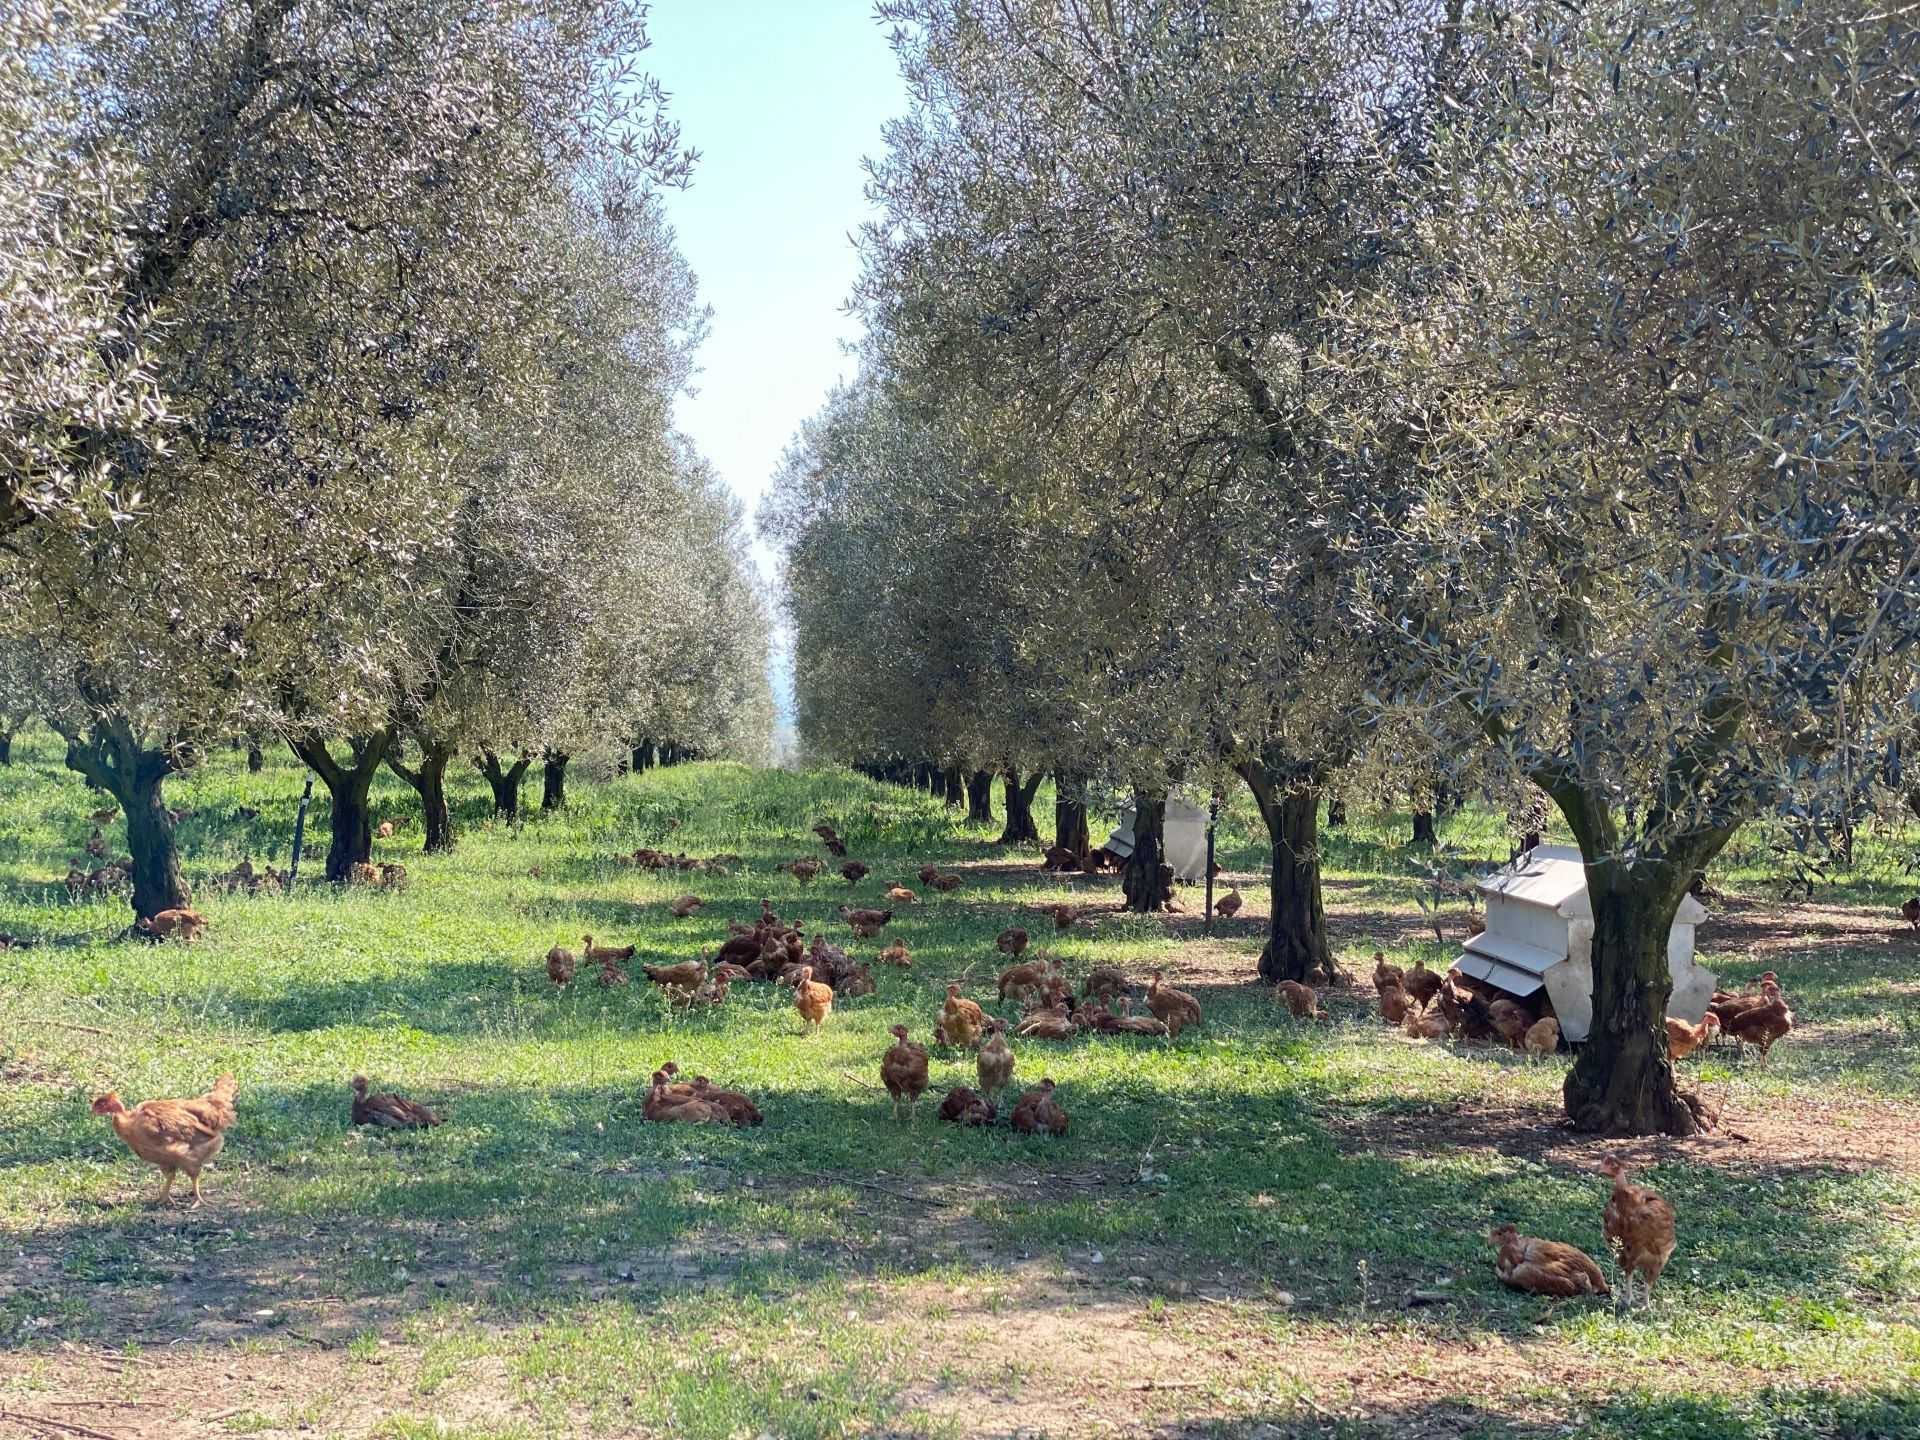 europe-competitions-production-the-best-olive-oils-awardwinning-producers-in-central-italy-prepare-for-harvest-olive-oil-times